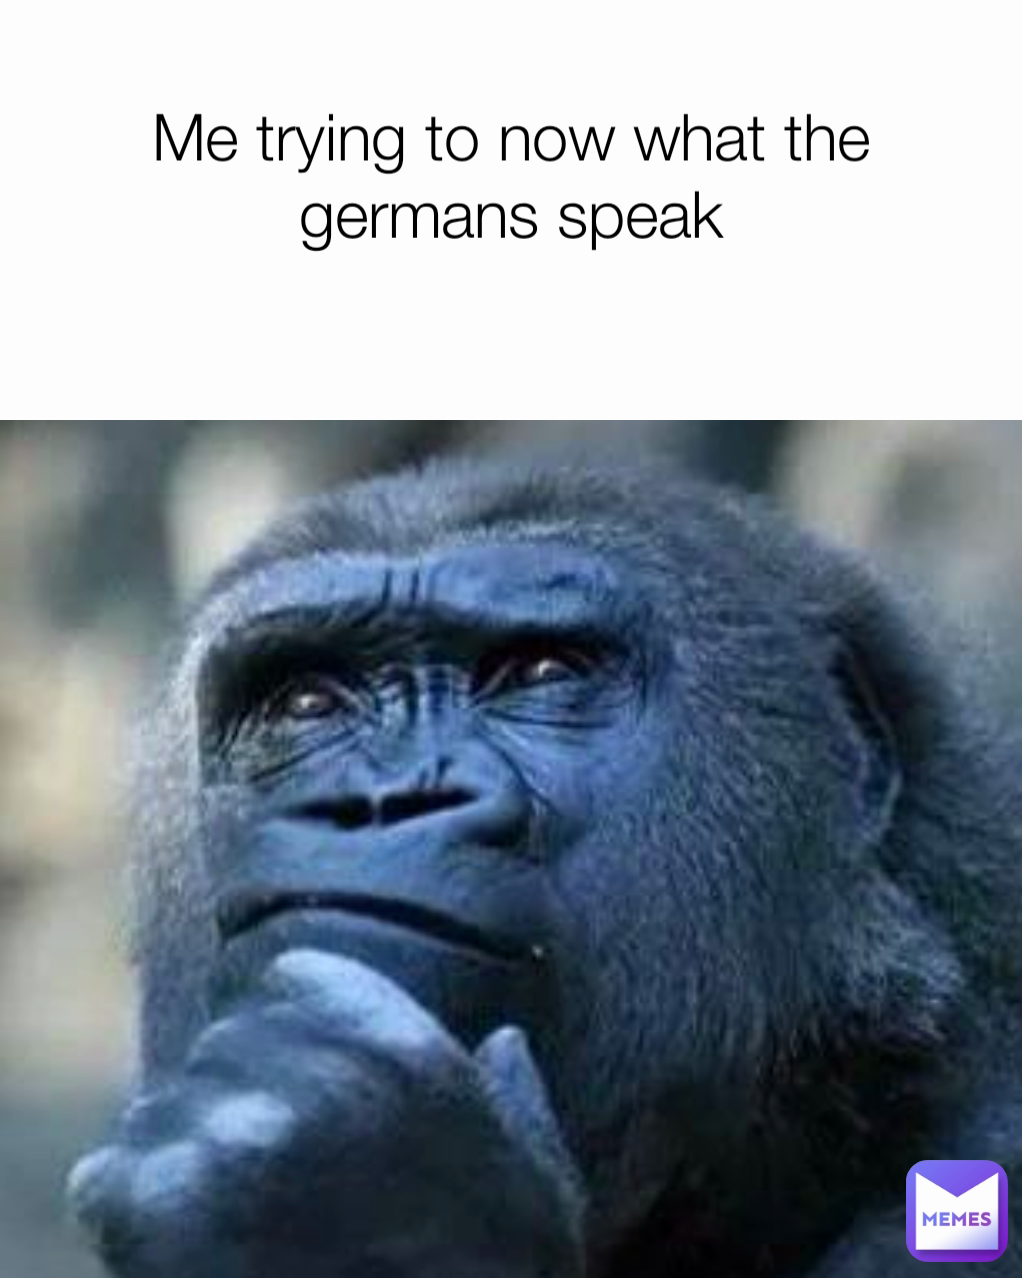 Me trying to now what the germans speak